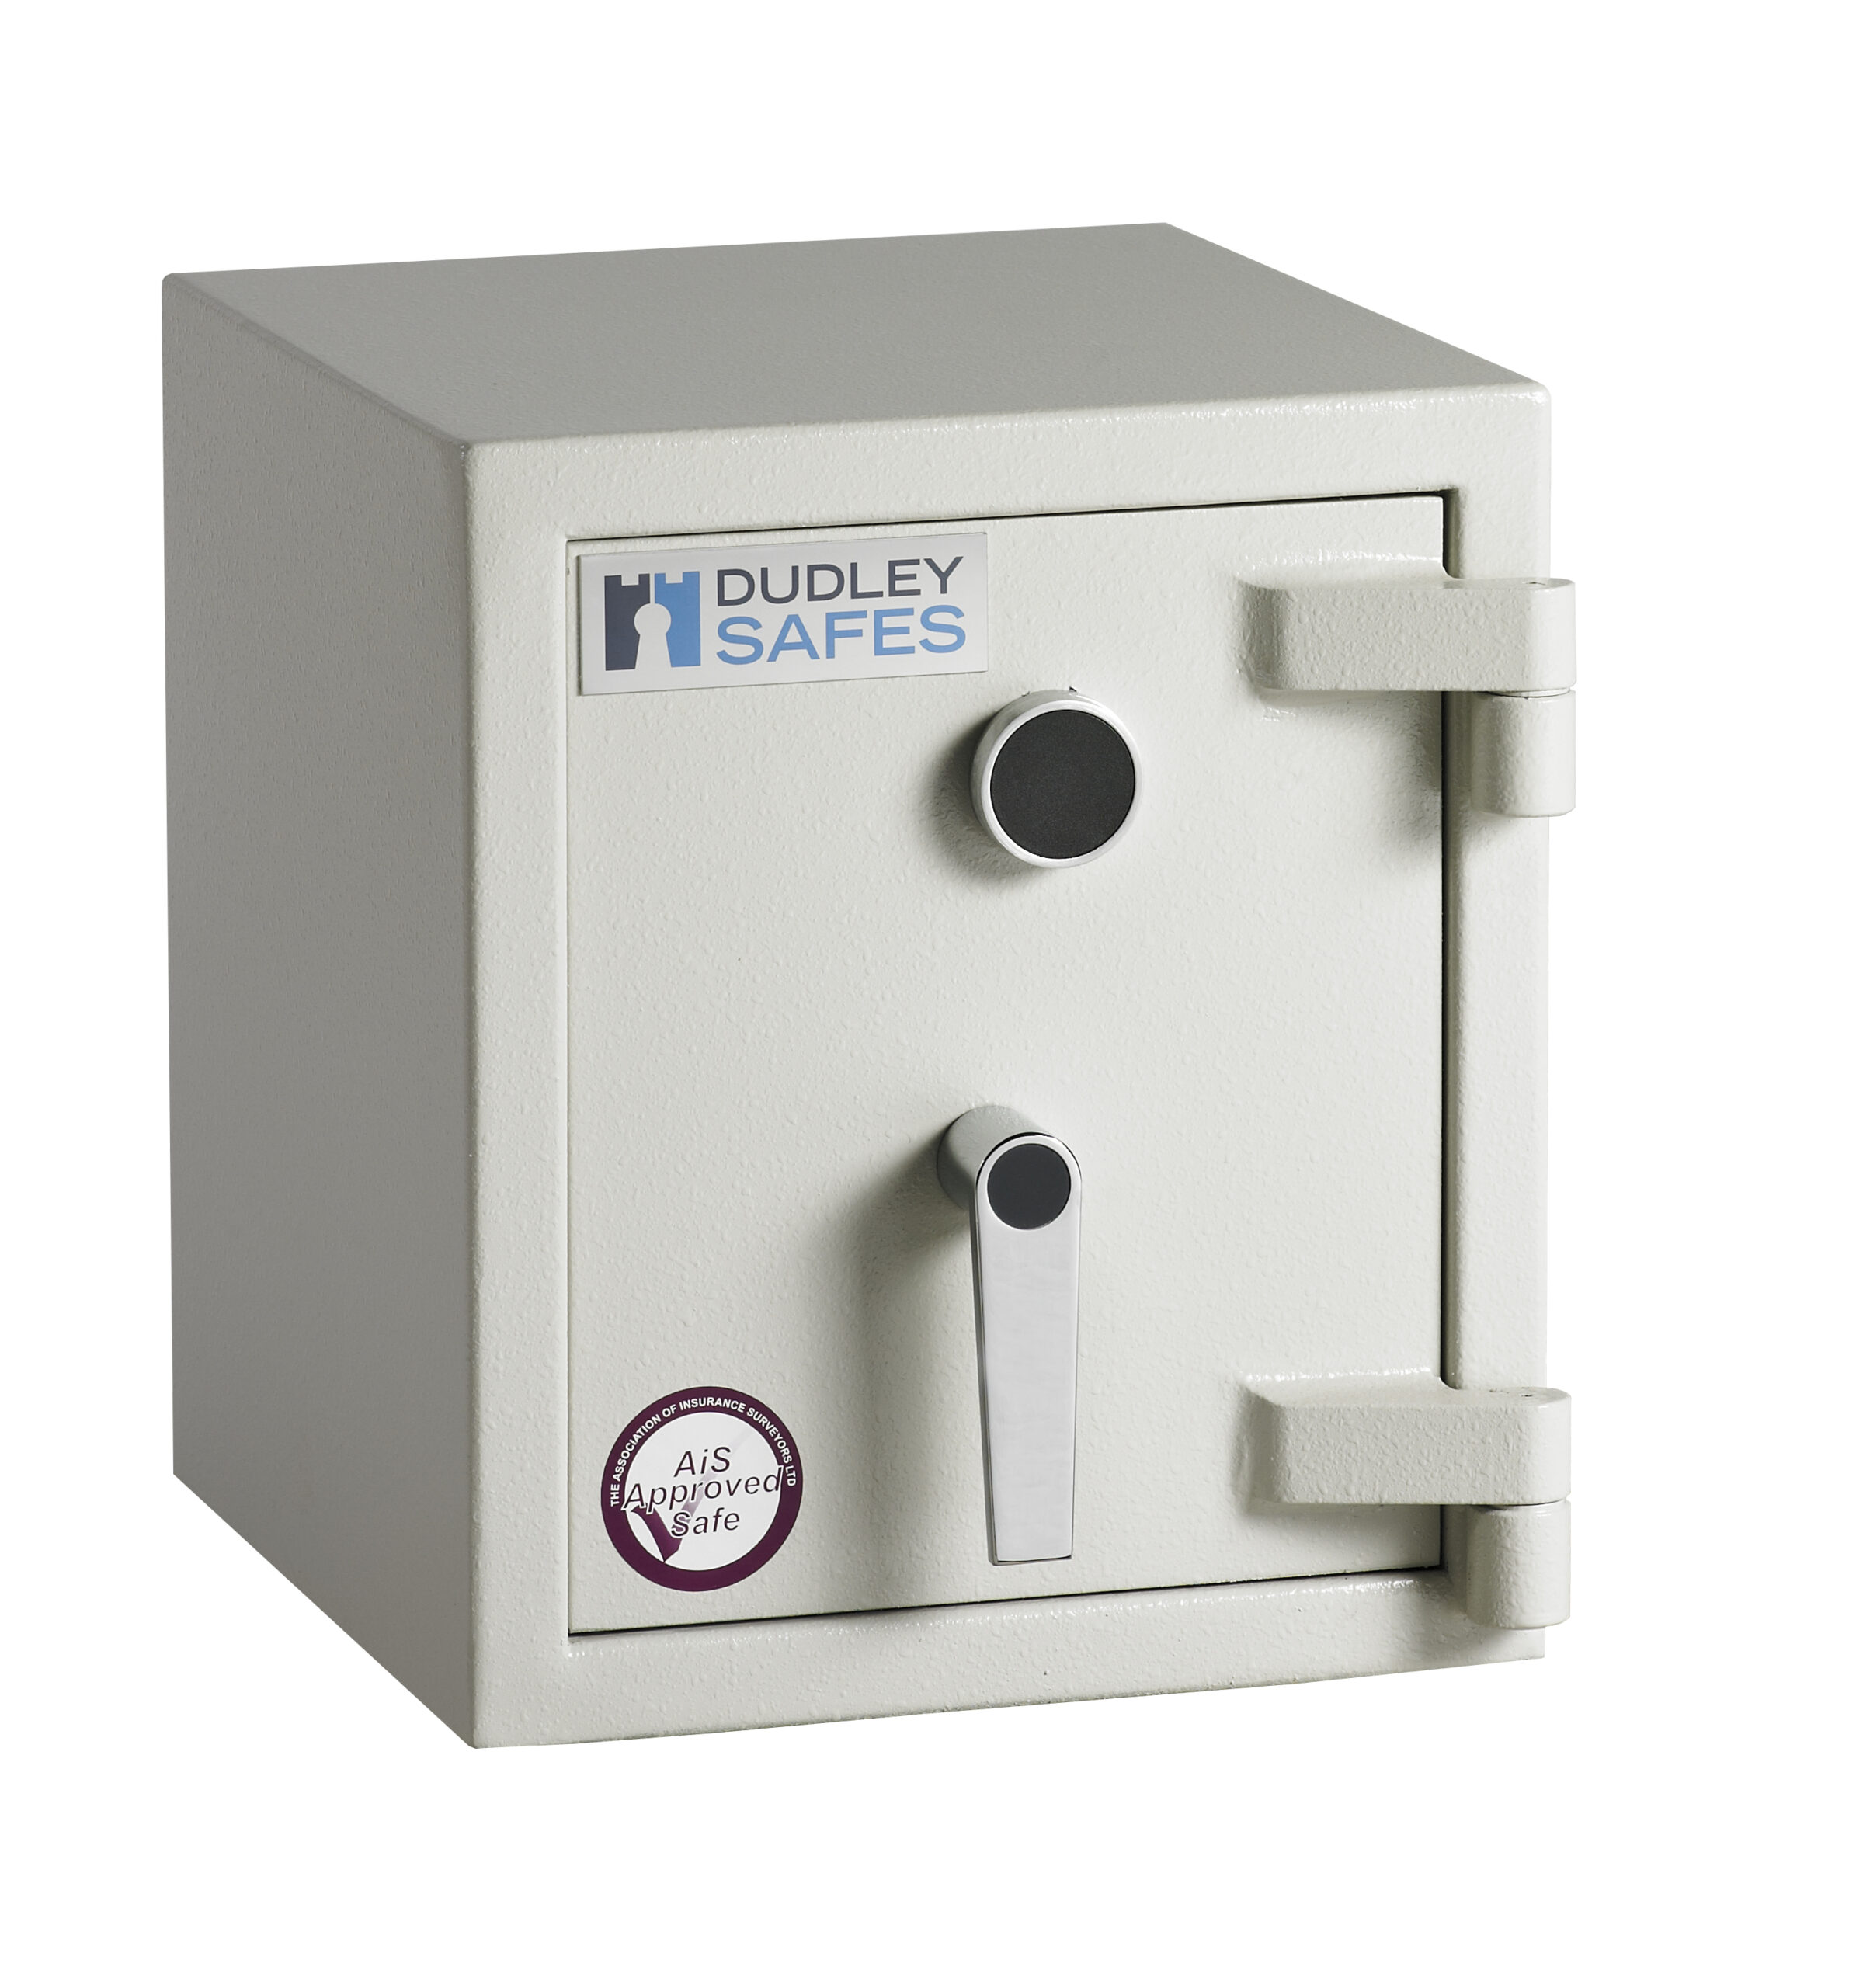 The Dudley Harlech Lite S2 size oo is a security safe for the home, office safe and commercial safe. Its heavy duty, and is fire resistant too! fITTED AS STANDARD WITH A HIGH SECURITY KEY LOCK. iTS ALSO AVAILABLE WITH AN ELECTRONIC CODE LOCL AND MECHANICAL COMBINATION.